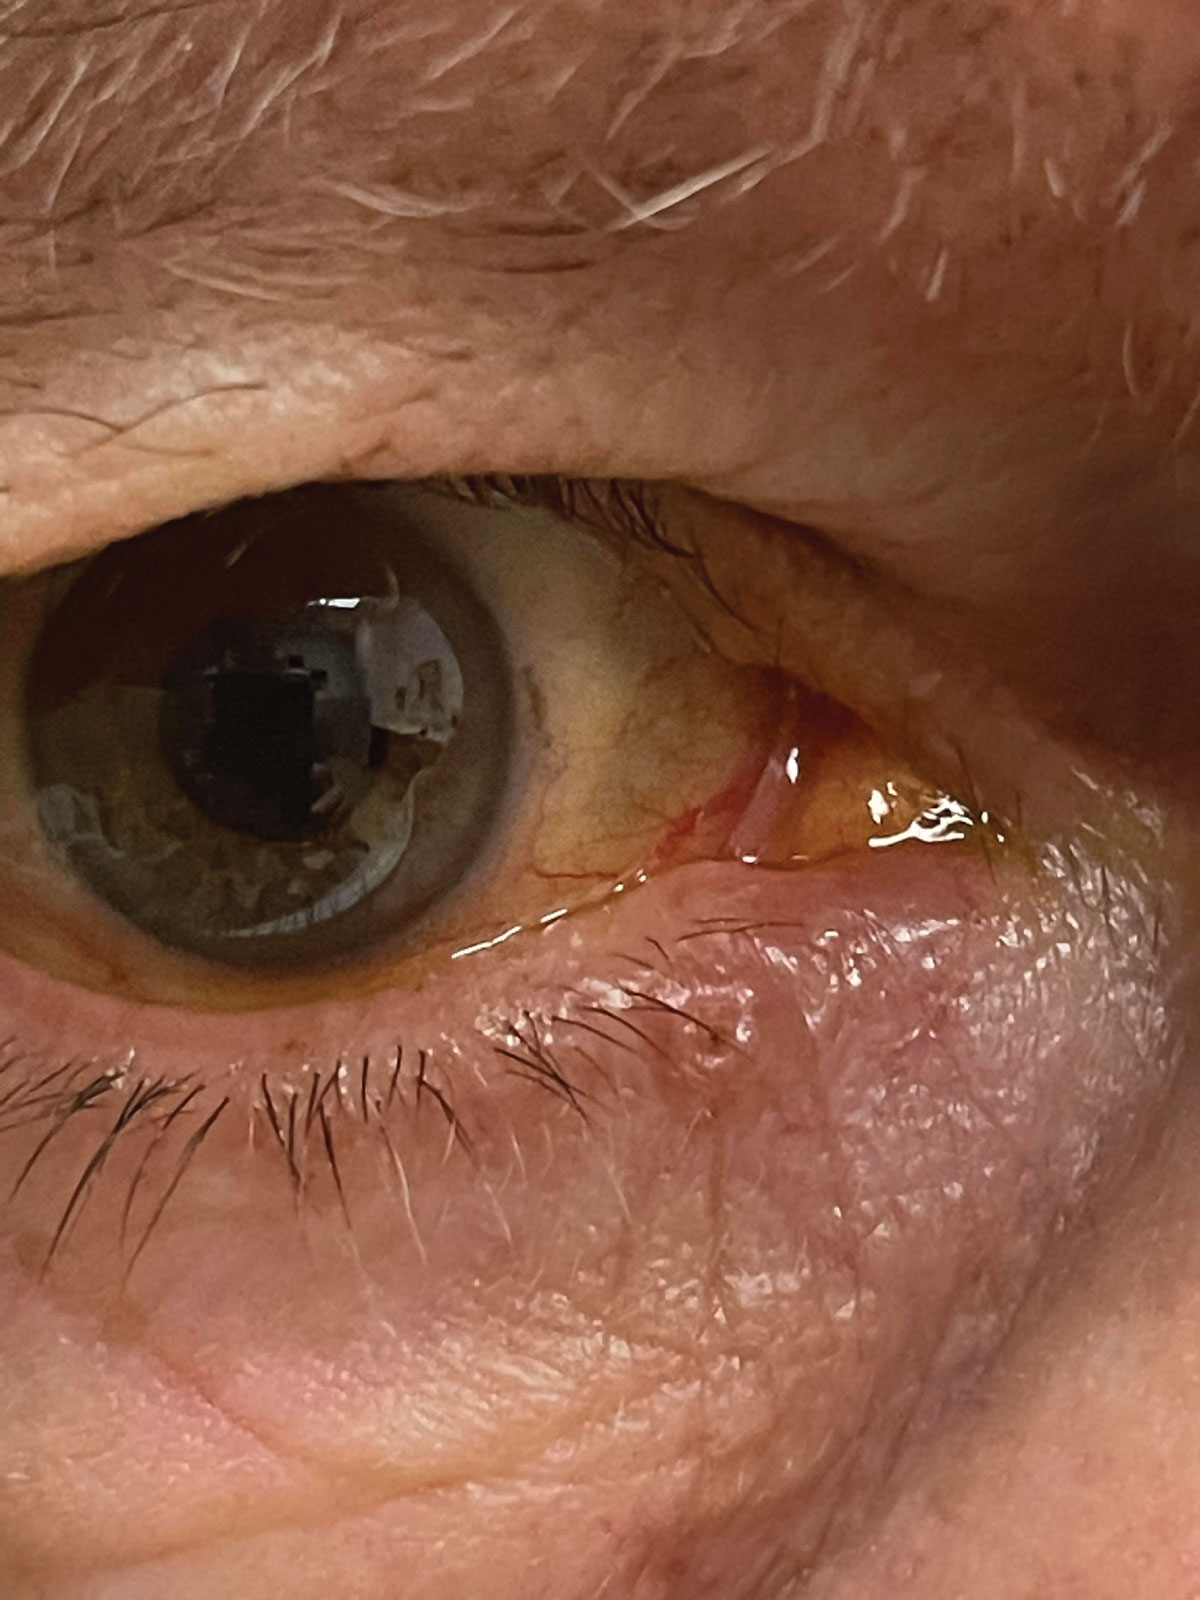 Suspicious non-healing, ulcerated skin lesion along the lower lid margin that the patient reported as becoming slightly larger over several months. Referral was made to oculoplastic surgeon to confirm diagnosis and necessary treatment of malignancy vs. benign lesion.